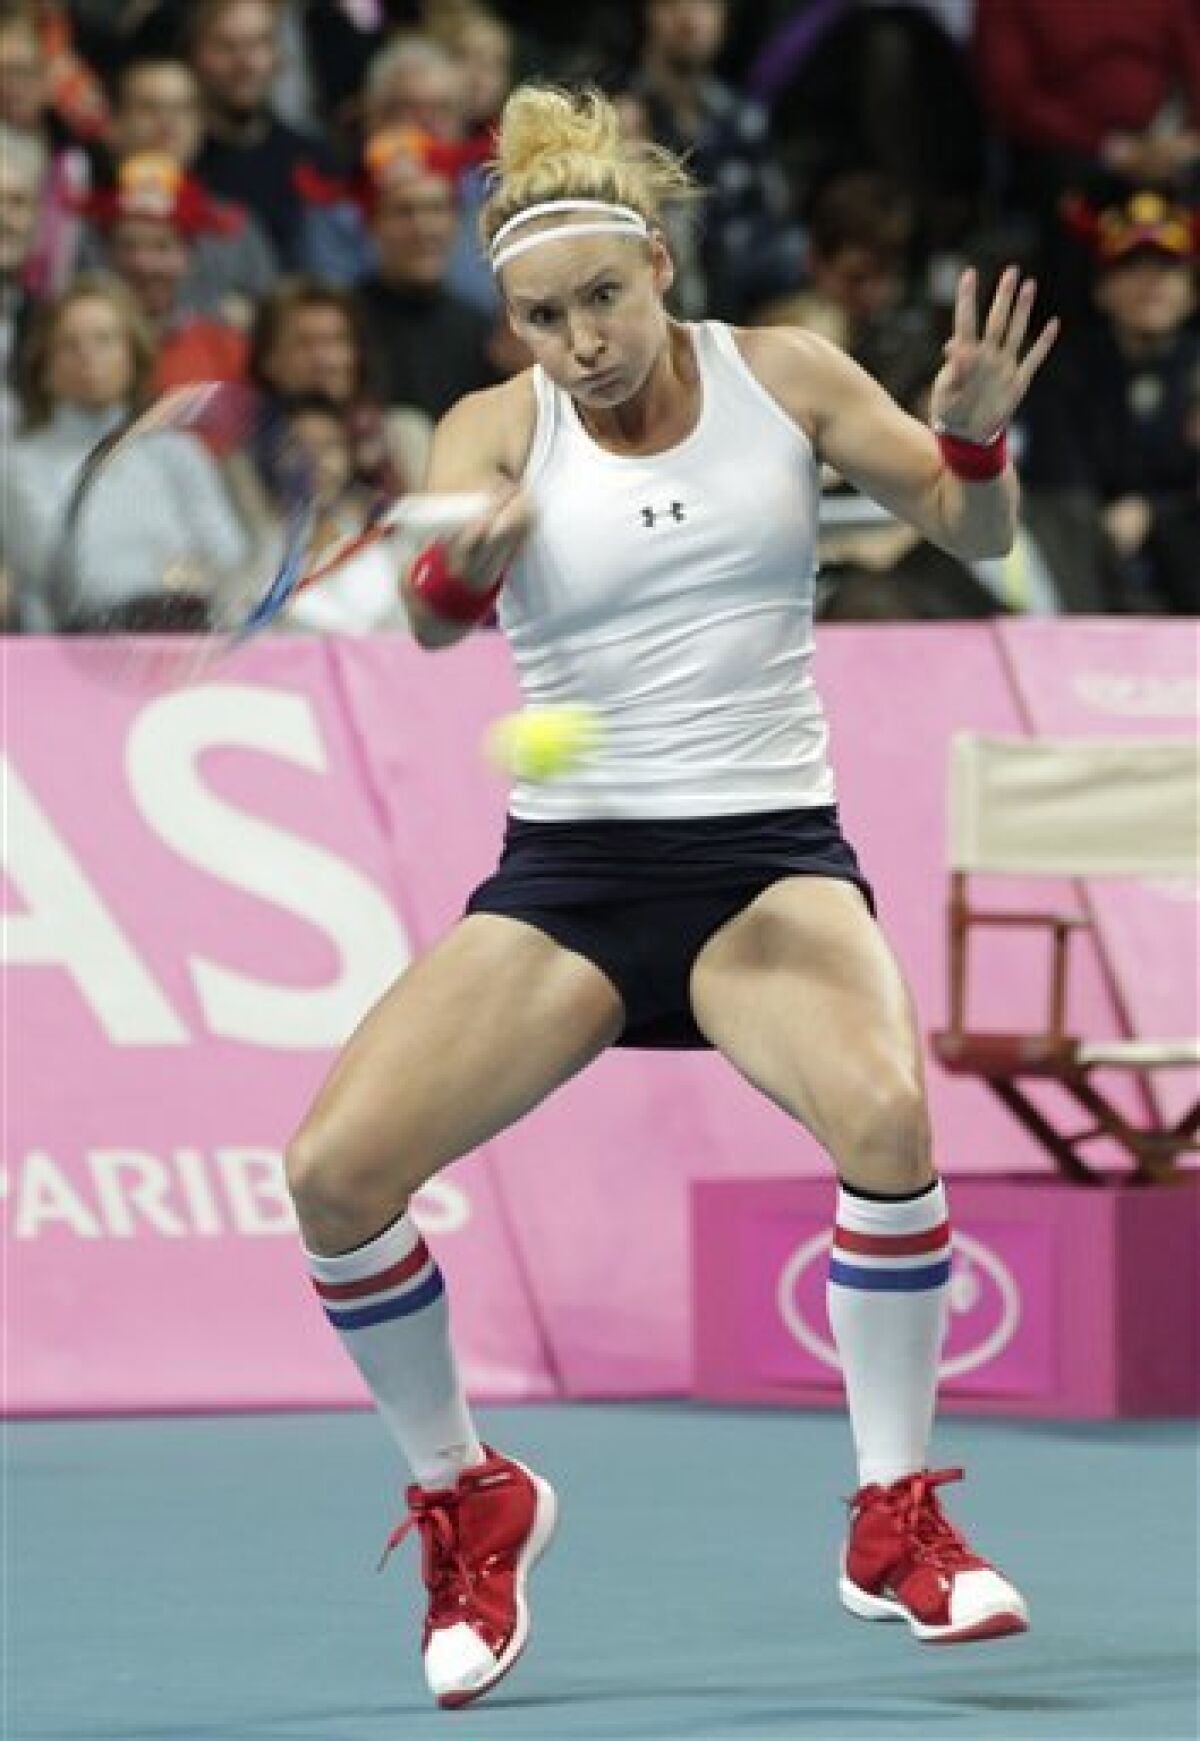 US player Bethanie Mattek-Sands returns the ball to Belgium's Yanina Wickmayer during the World Group Fed Cup match in Antwerp, Belgium, Saturday, Feb. 5, 2011. (AP Photo/Yves Logghe)